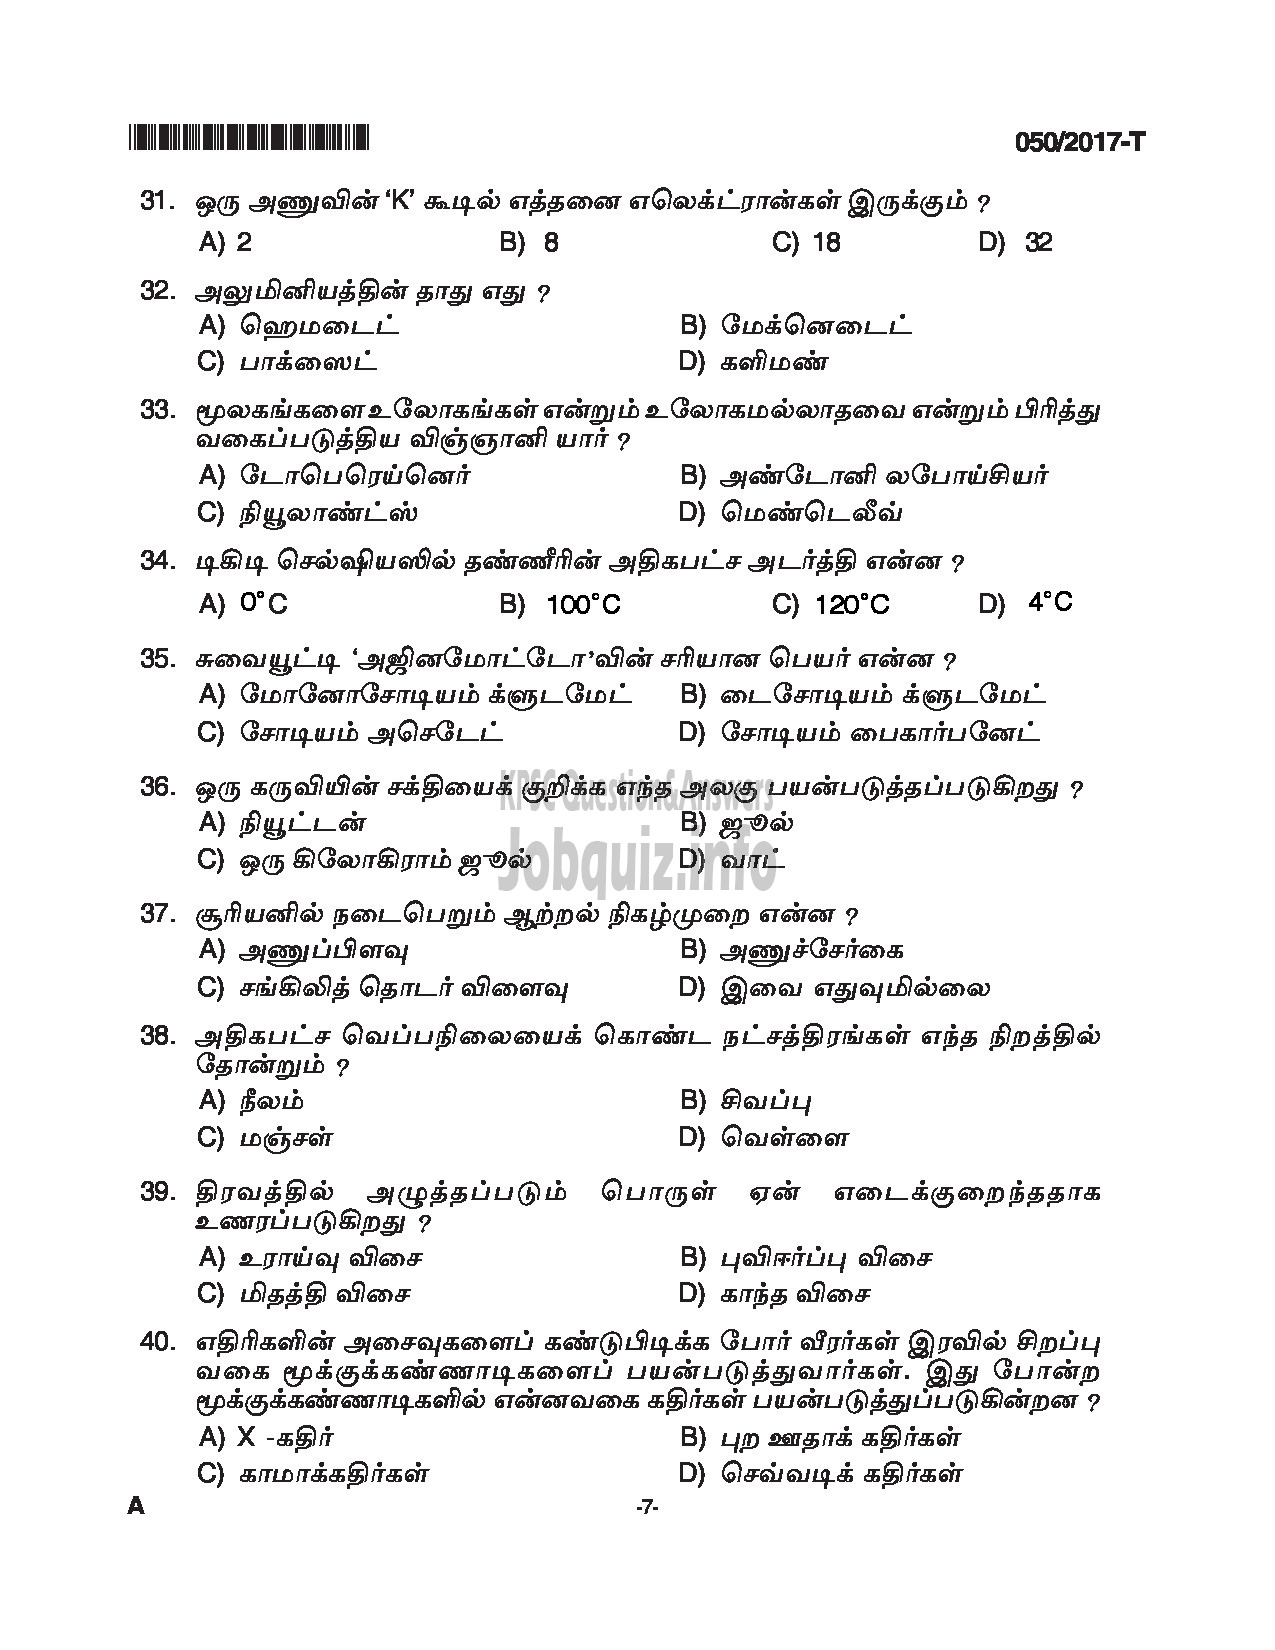 Kerala PSC Question Paper - LDC SR FOR SC/ST, SR FROM DIFFERENTLY ABLED CANDIDATES CAT.NO 122/16, 413/16 QUESTION PAPER(TAMIL)-7